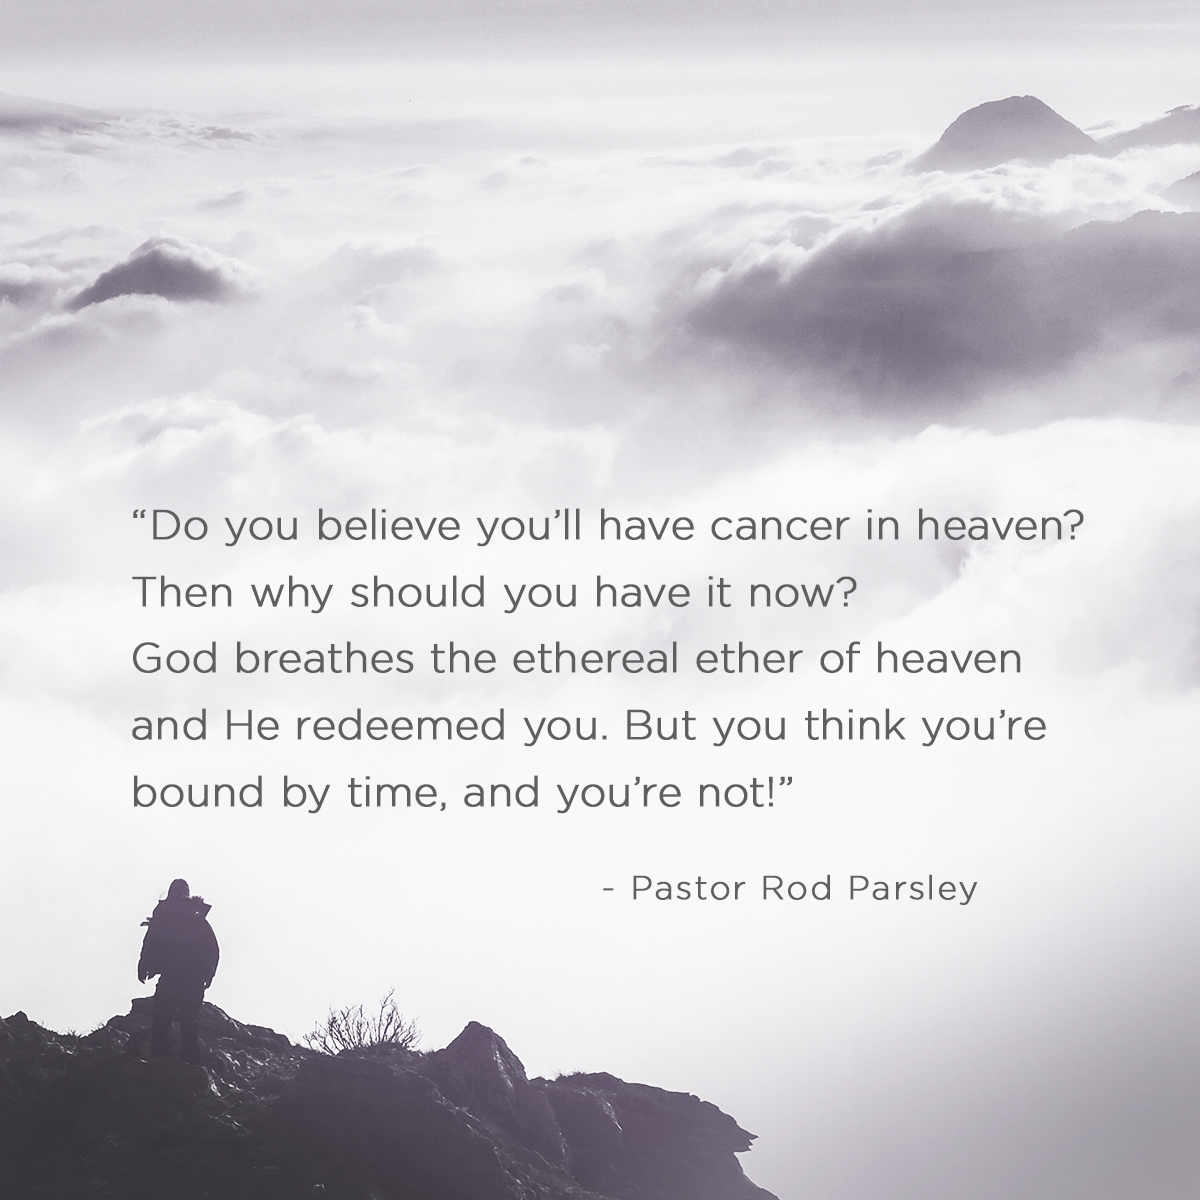 “Do you believe you’ll have cancer in heaven? Then why should you have it now? God breathes the ethereal ether of heaven and he redeemed you. But you think you’re bound by time, and you’re not! ” – Pastor Rod Parsley